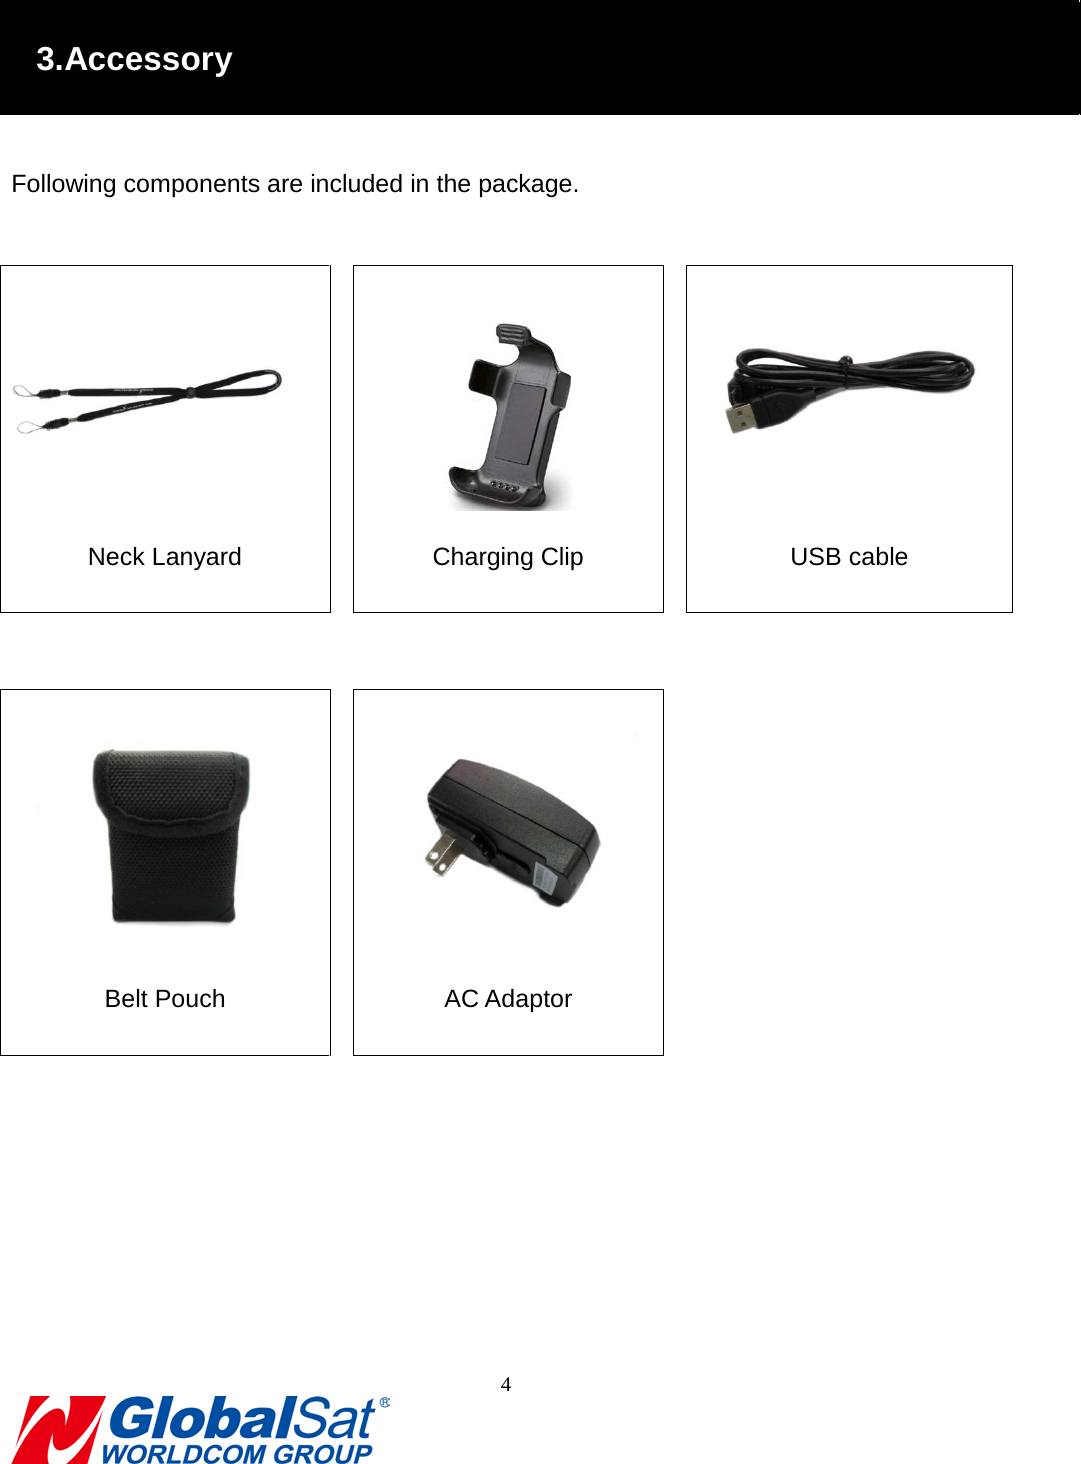                                                                                3.Accessory  Following components are included in the package.         Neck Lanyard  Charging Clip  USB cable           Belt Pouch  AC Adaptor  4  